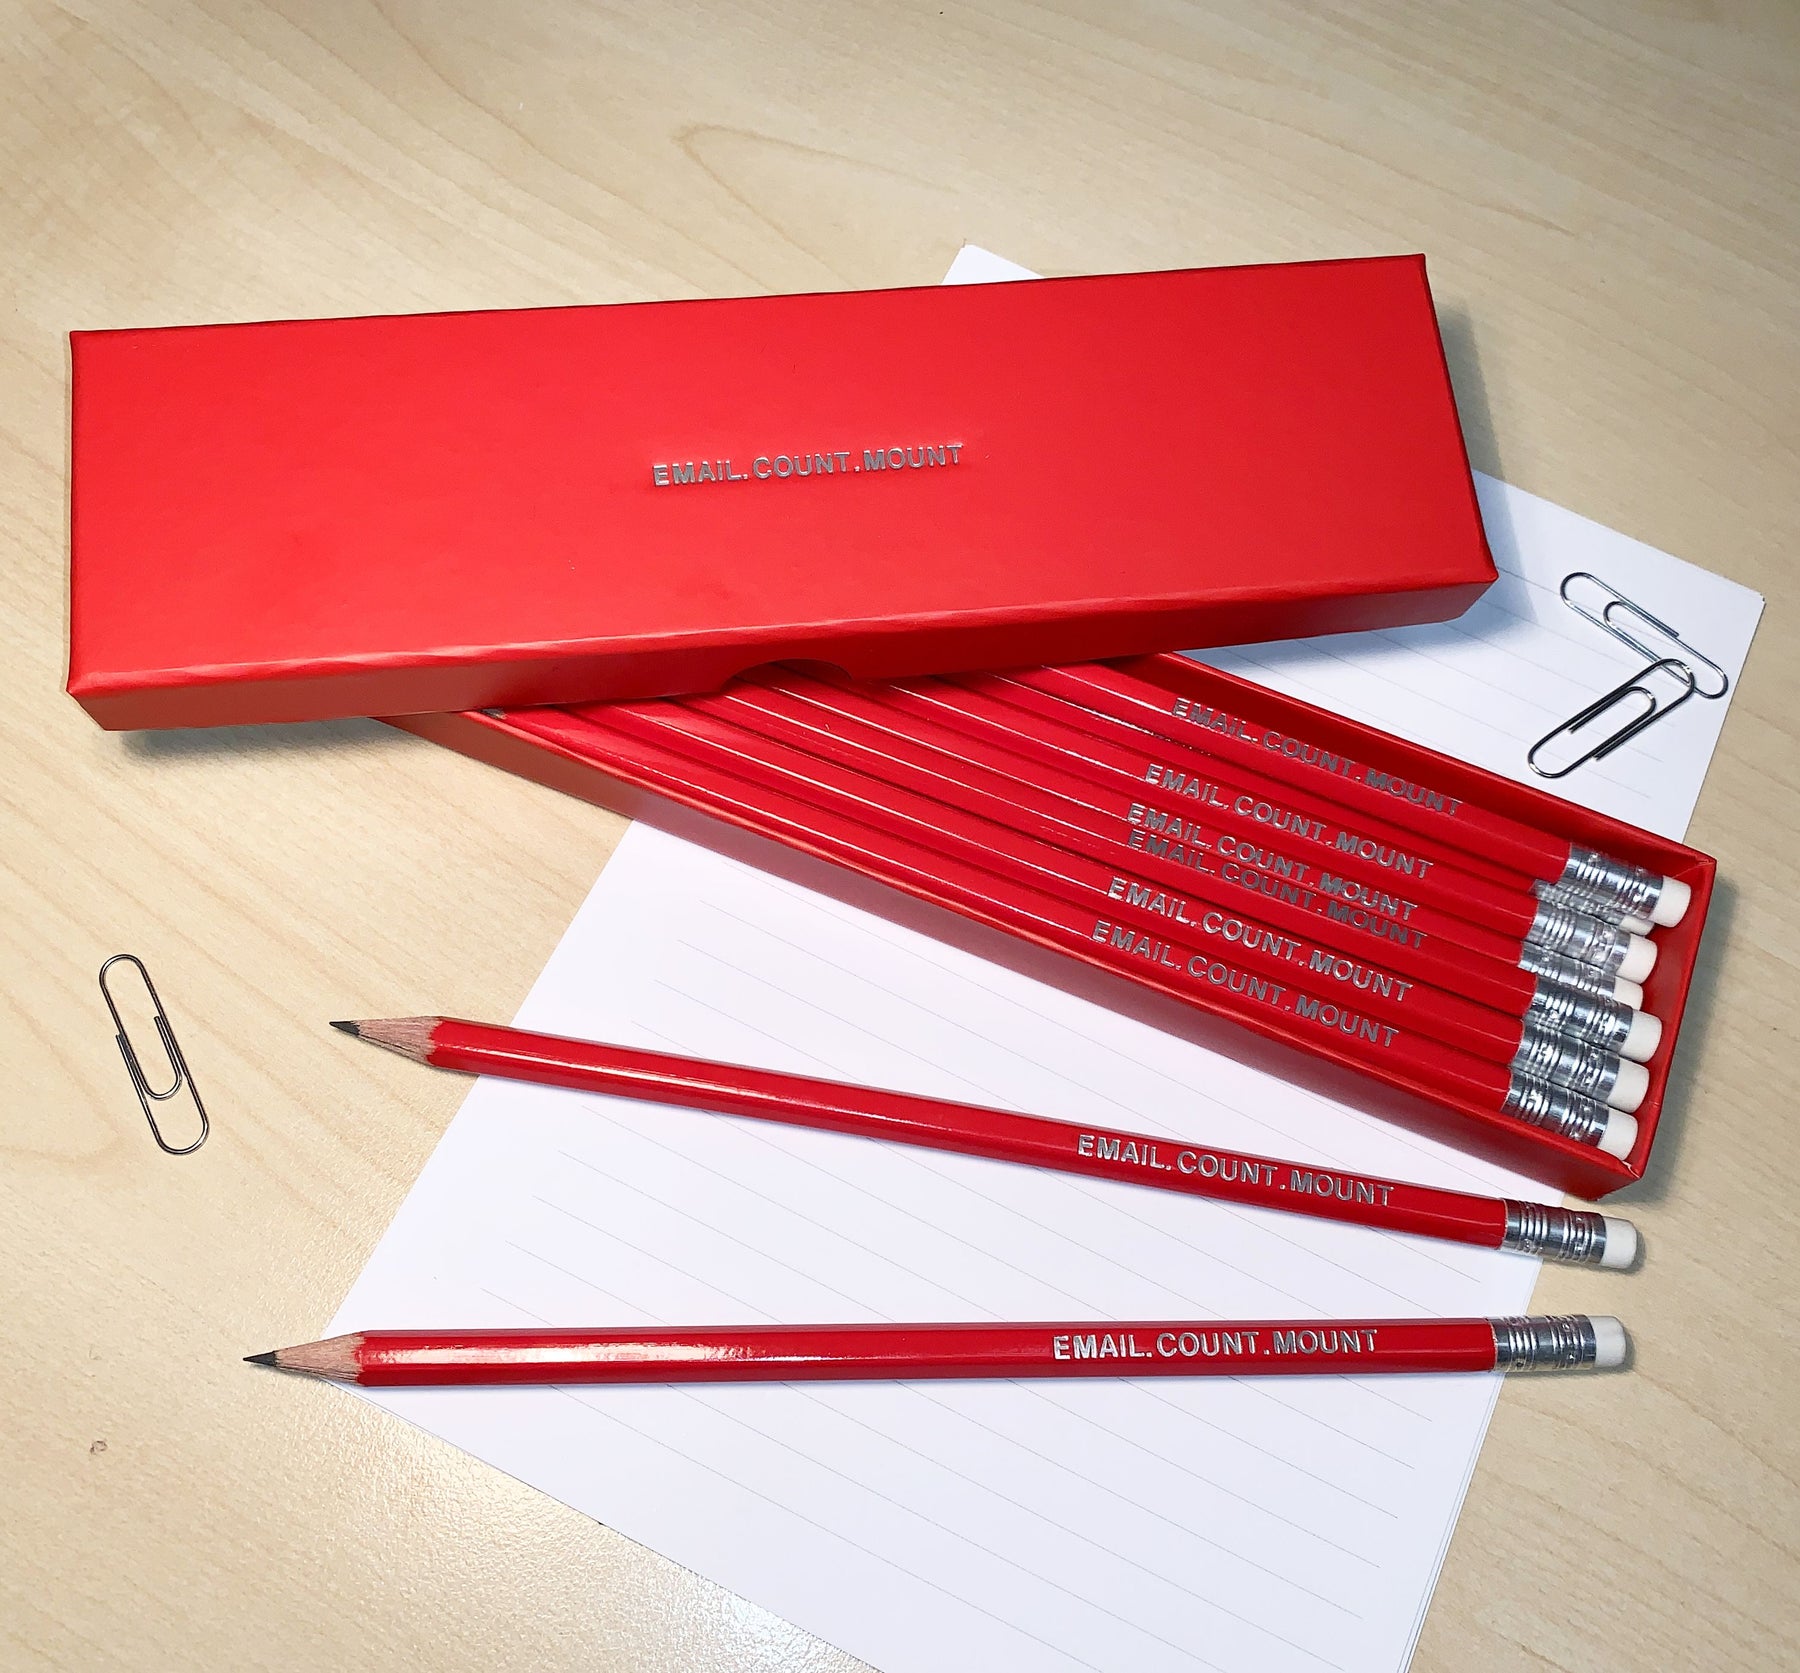 What3words.com feature pencils in a box